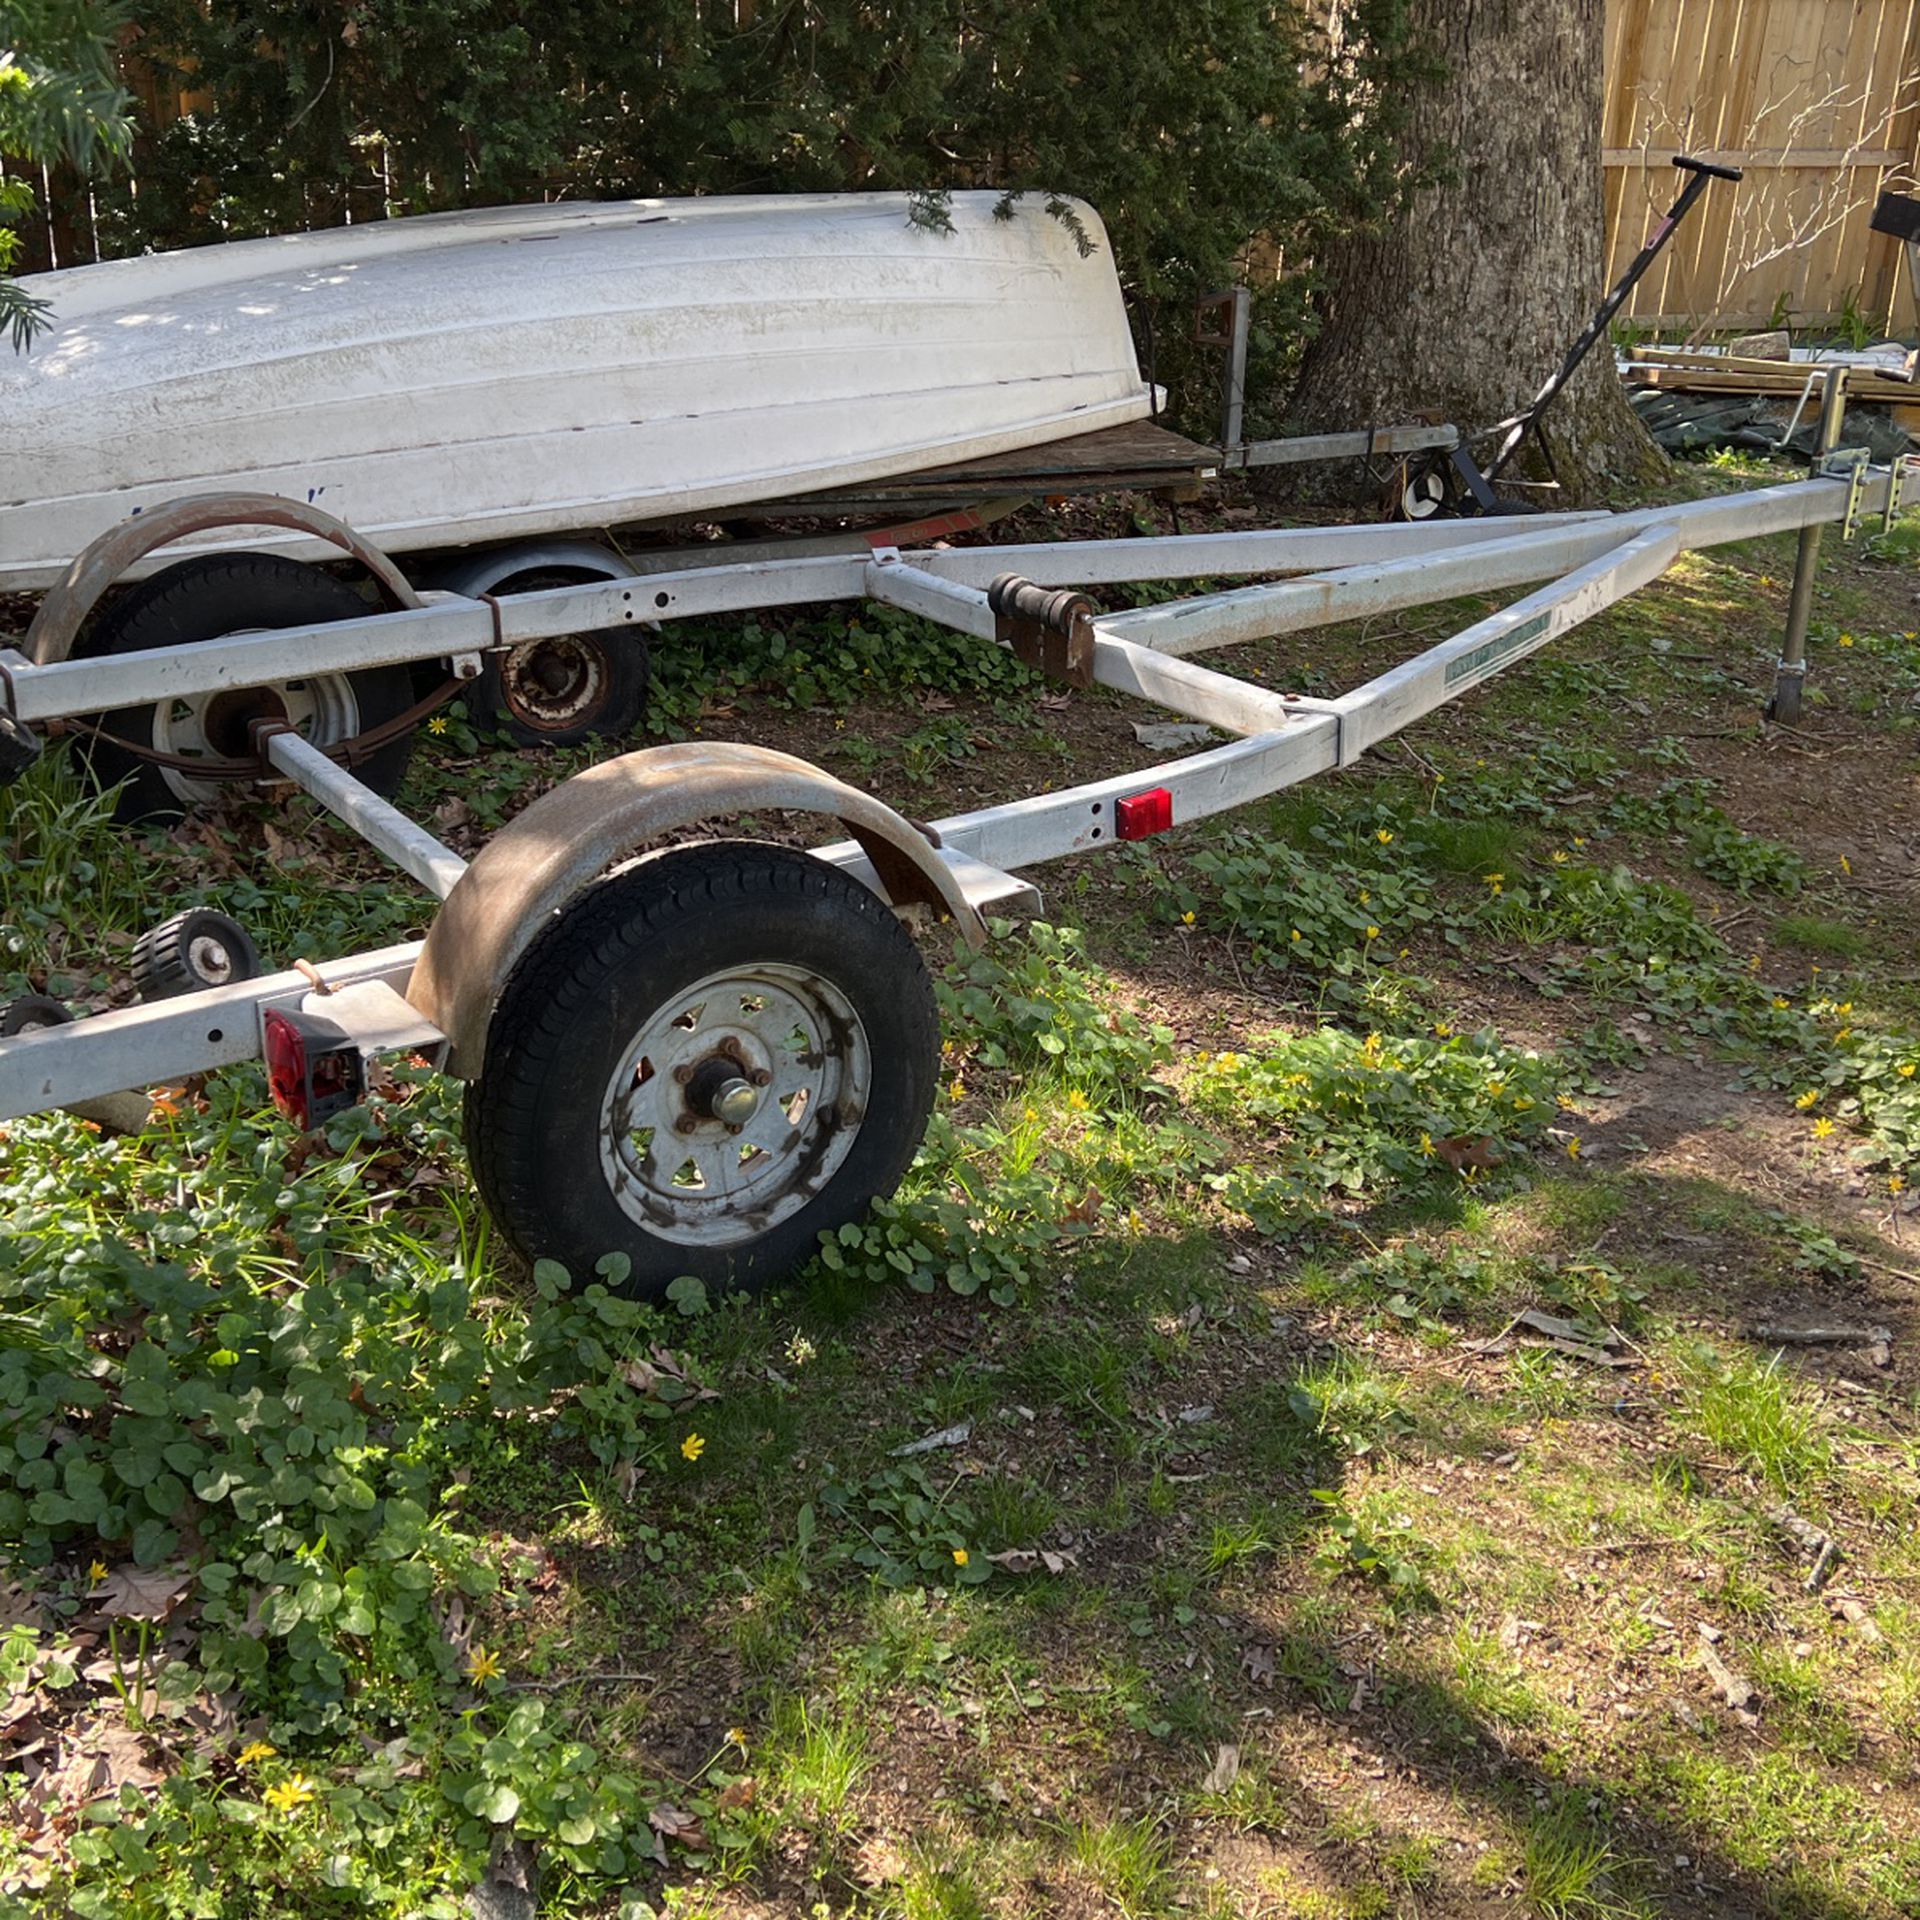 Clean Boat Trailer. Good for 15–18 foot boat. May be a little bit larger. No registration. Can be registered as homemade.